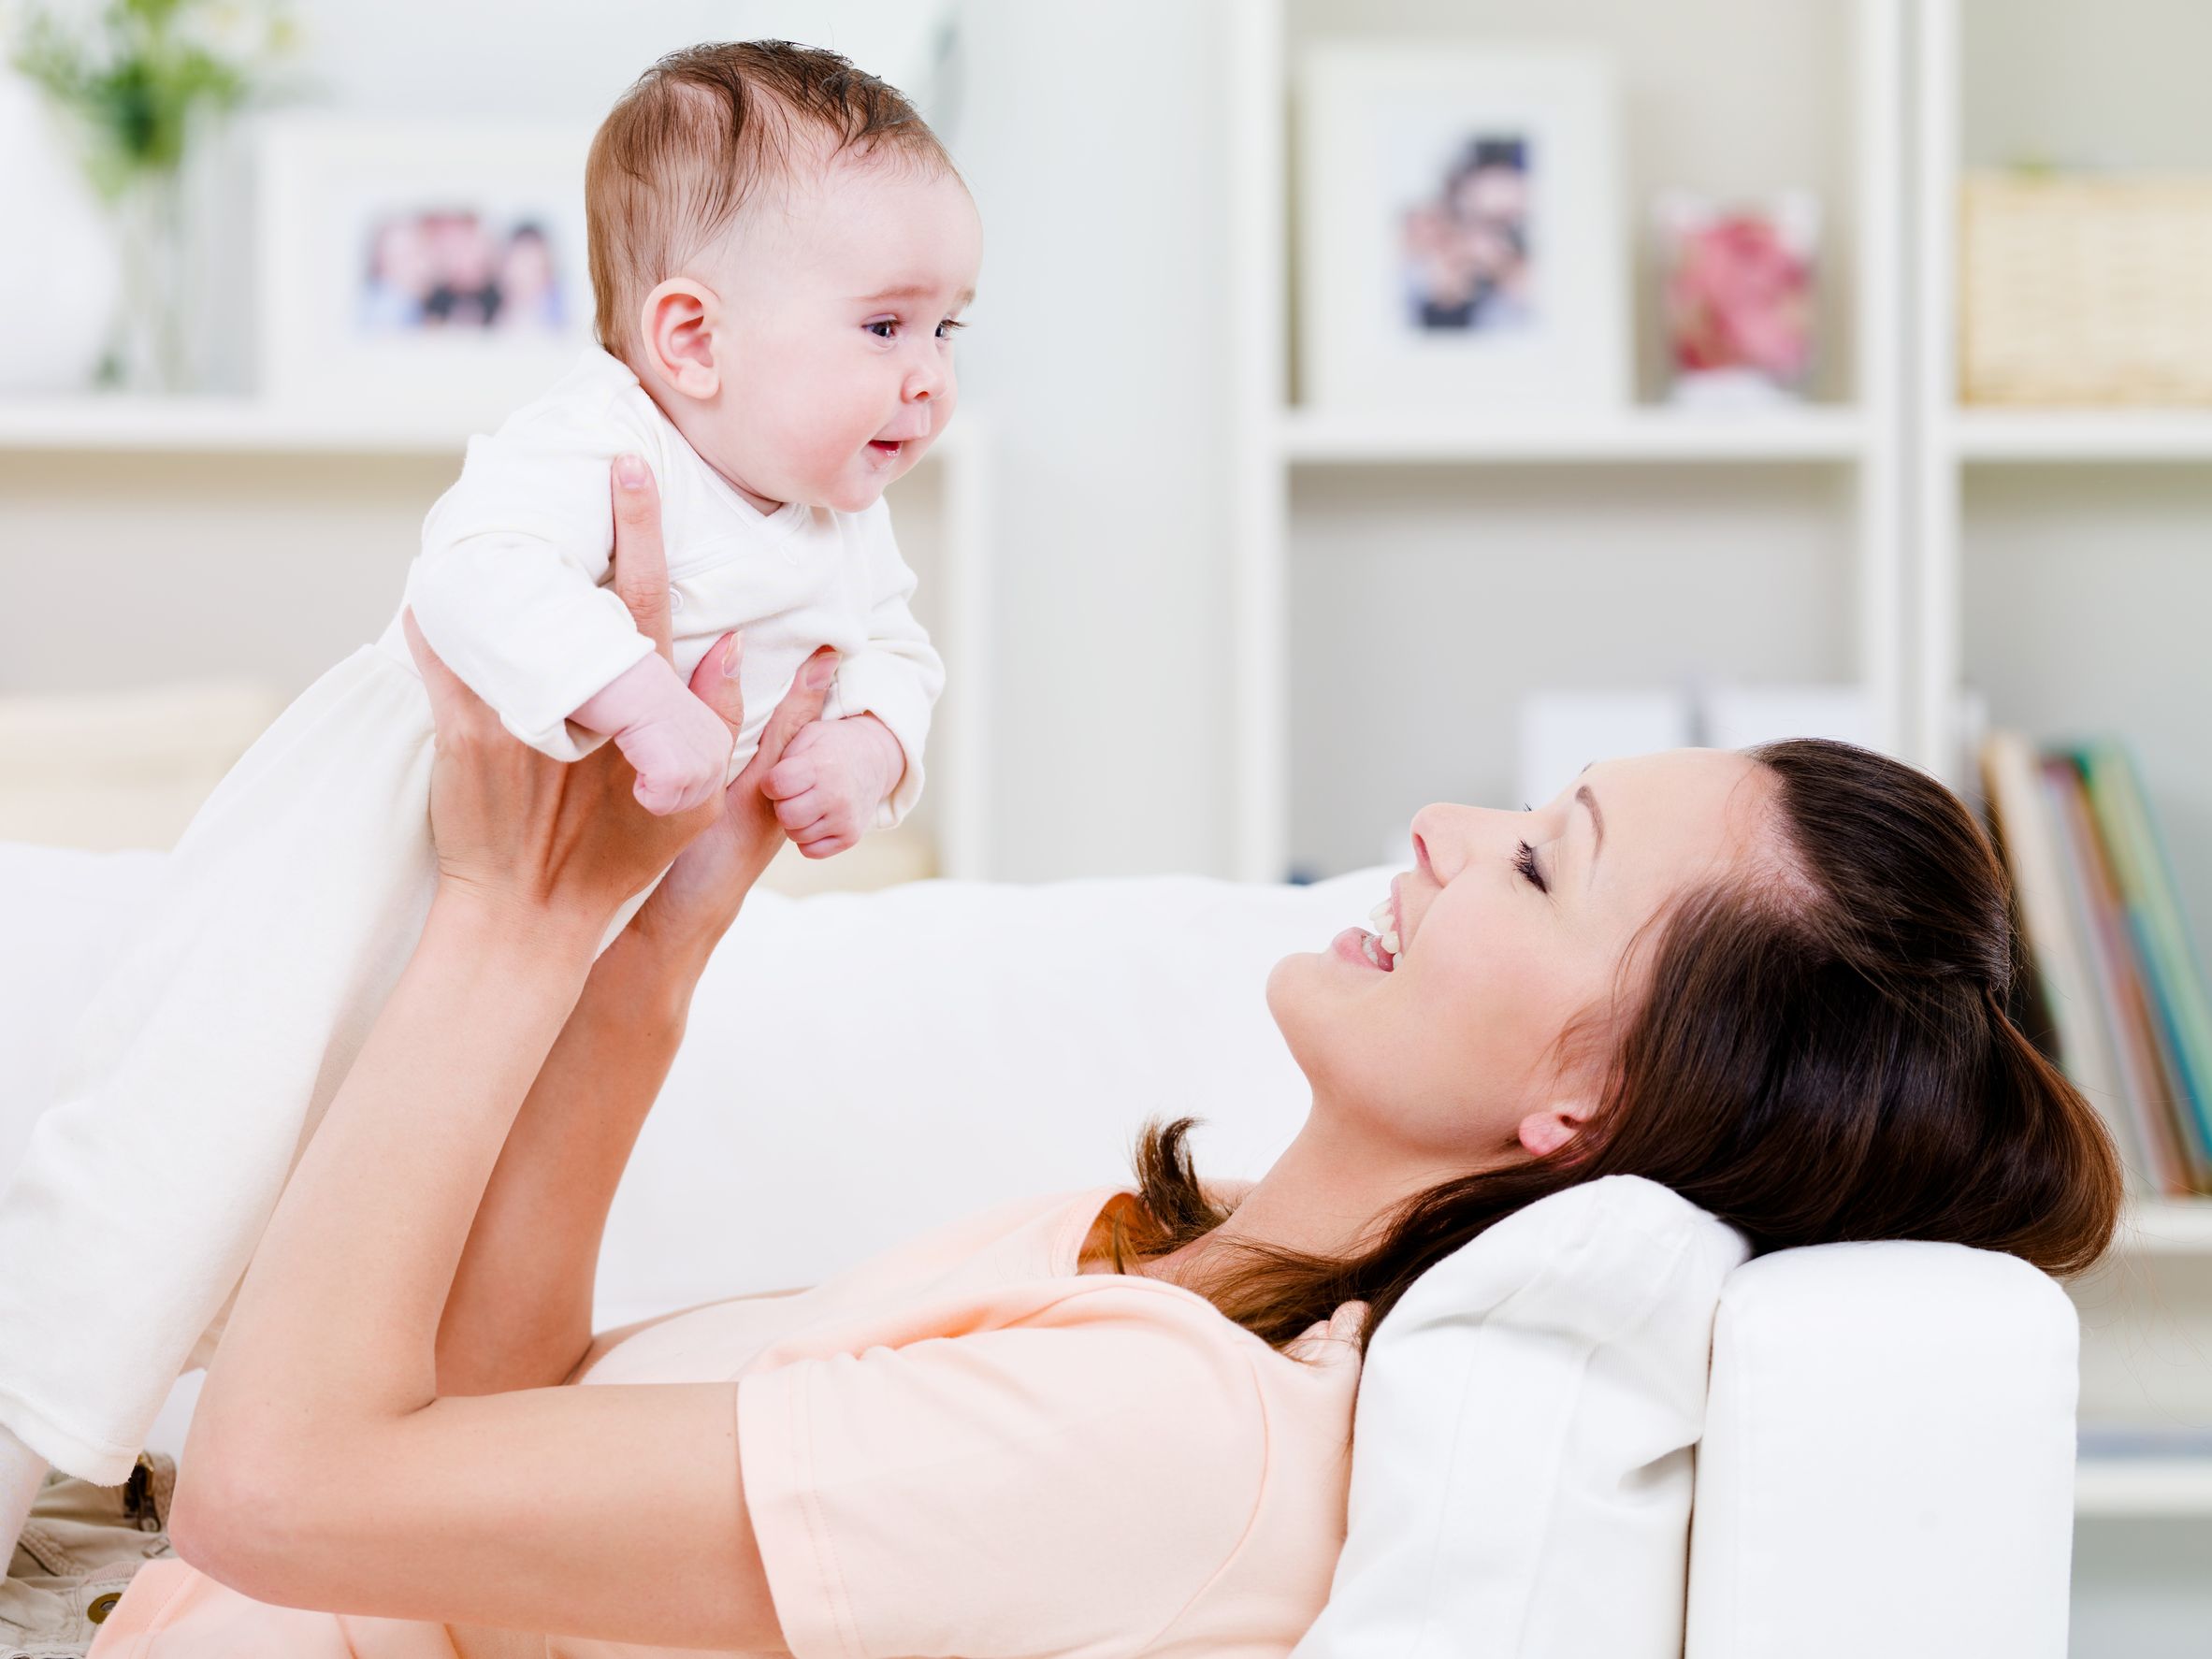 5 Ways to Prepare Your Home for a New Baby